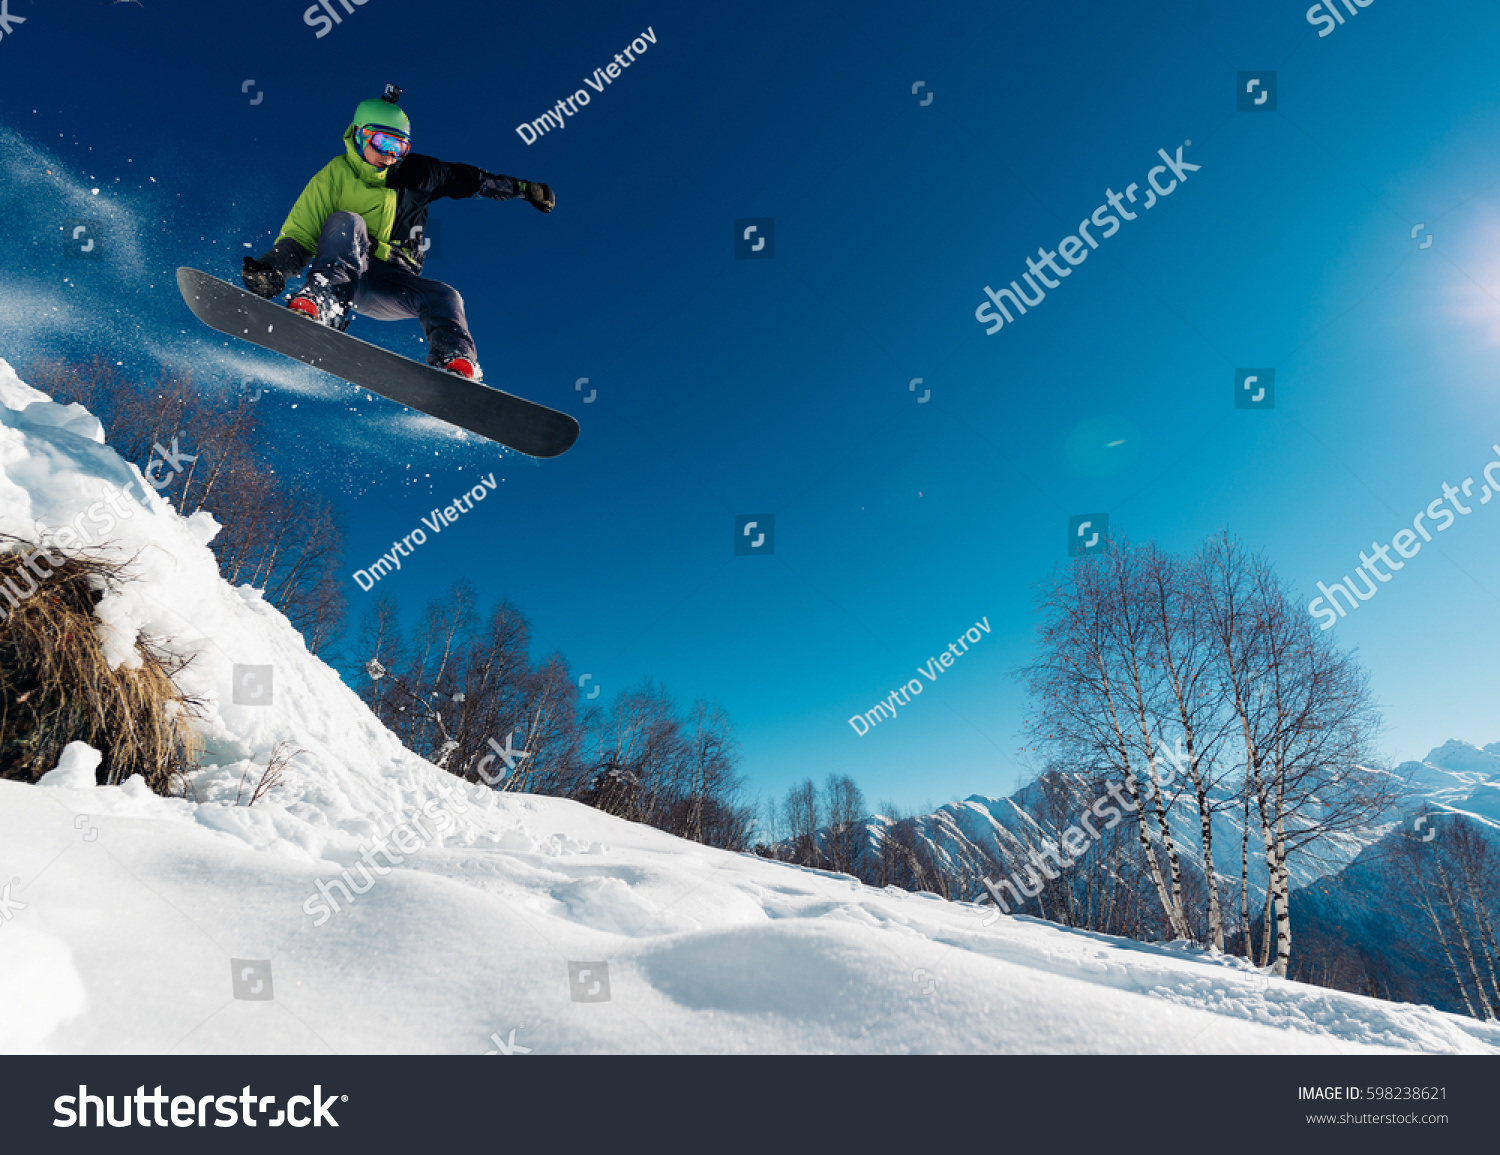 snowboarder is jumping with snowboard from snowhill #598238621